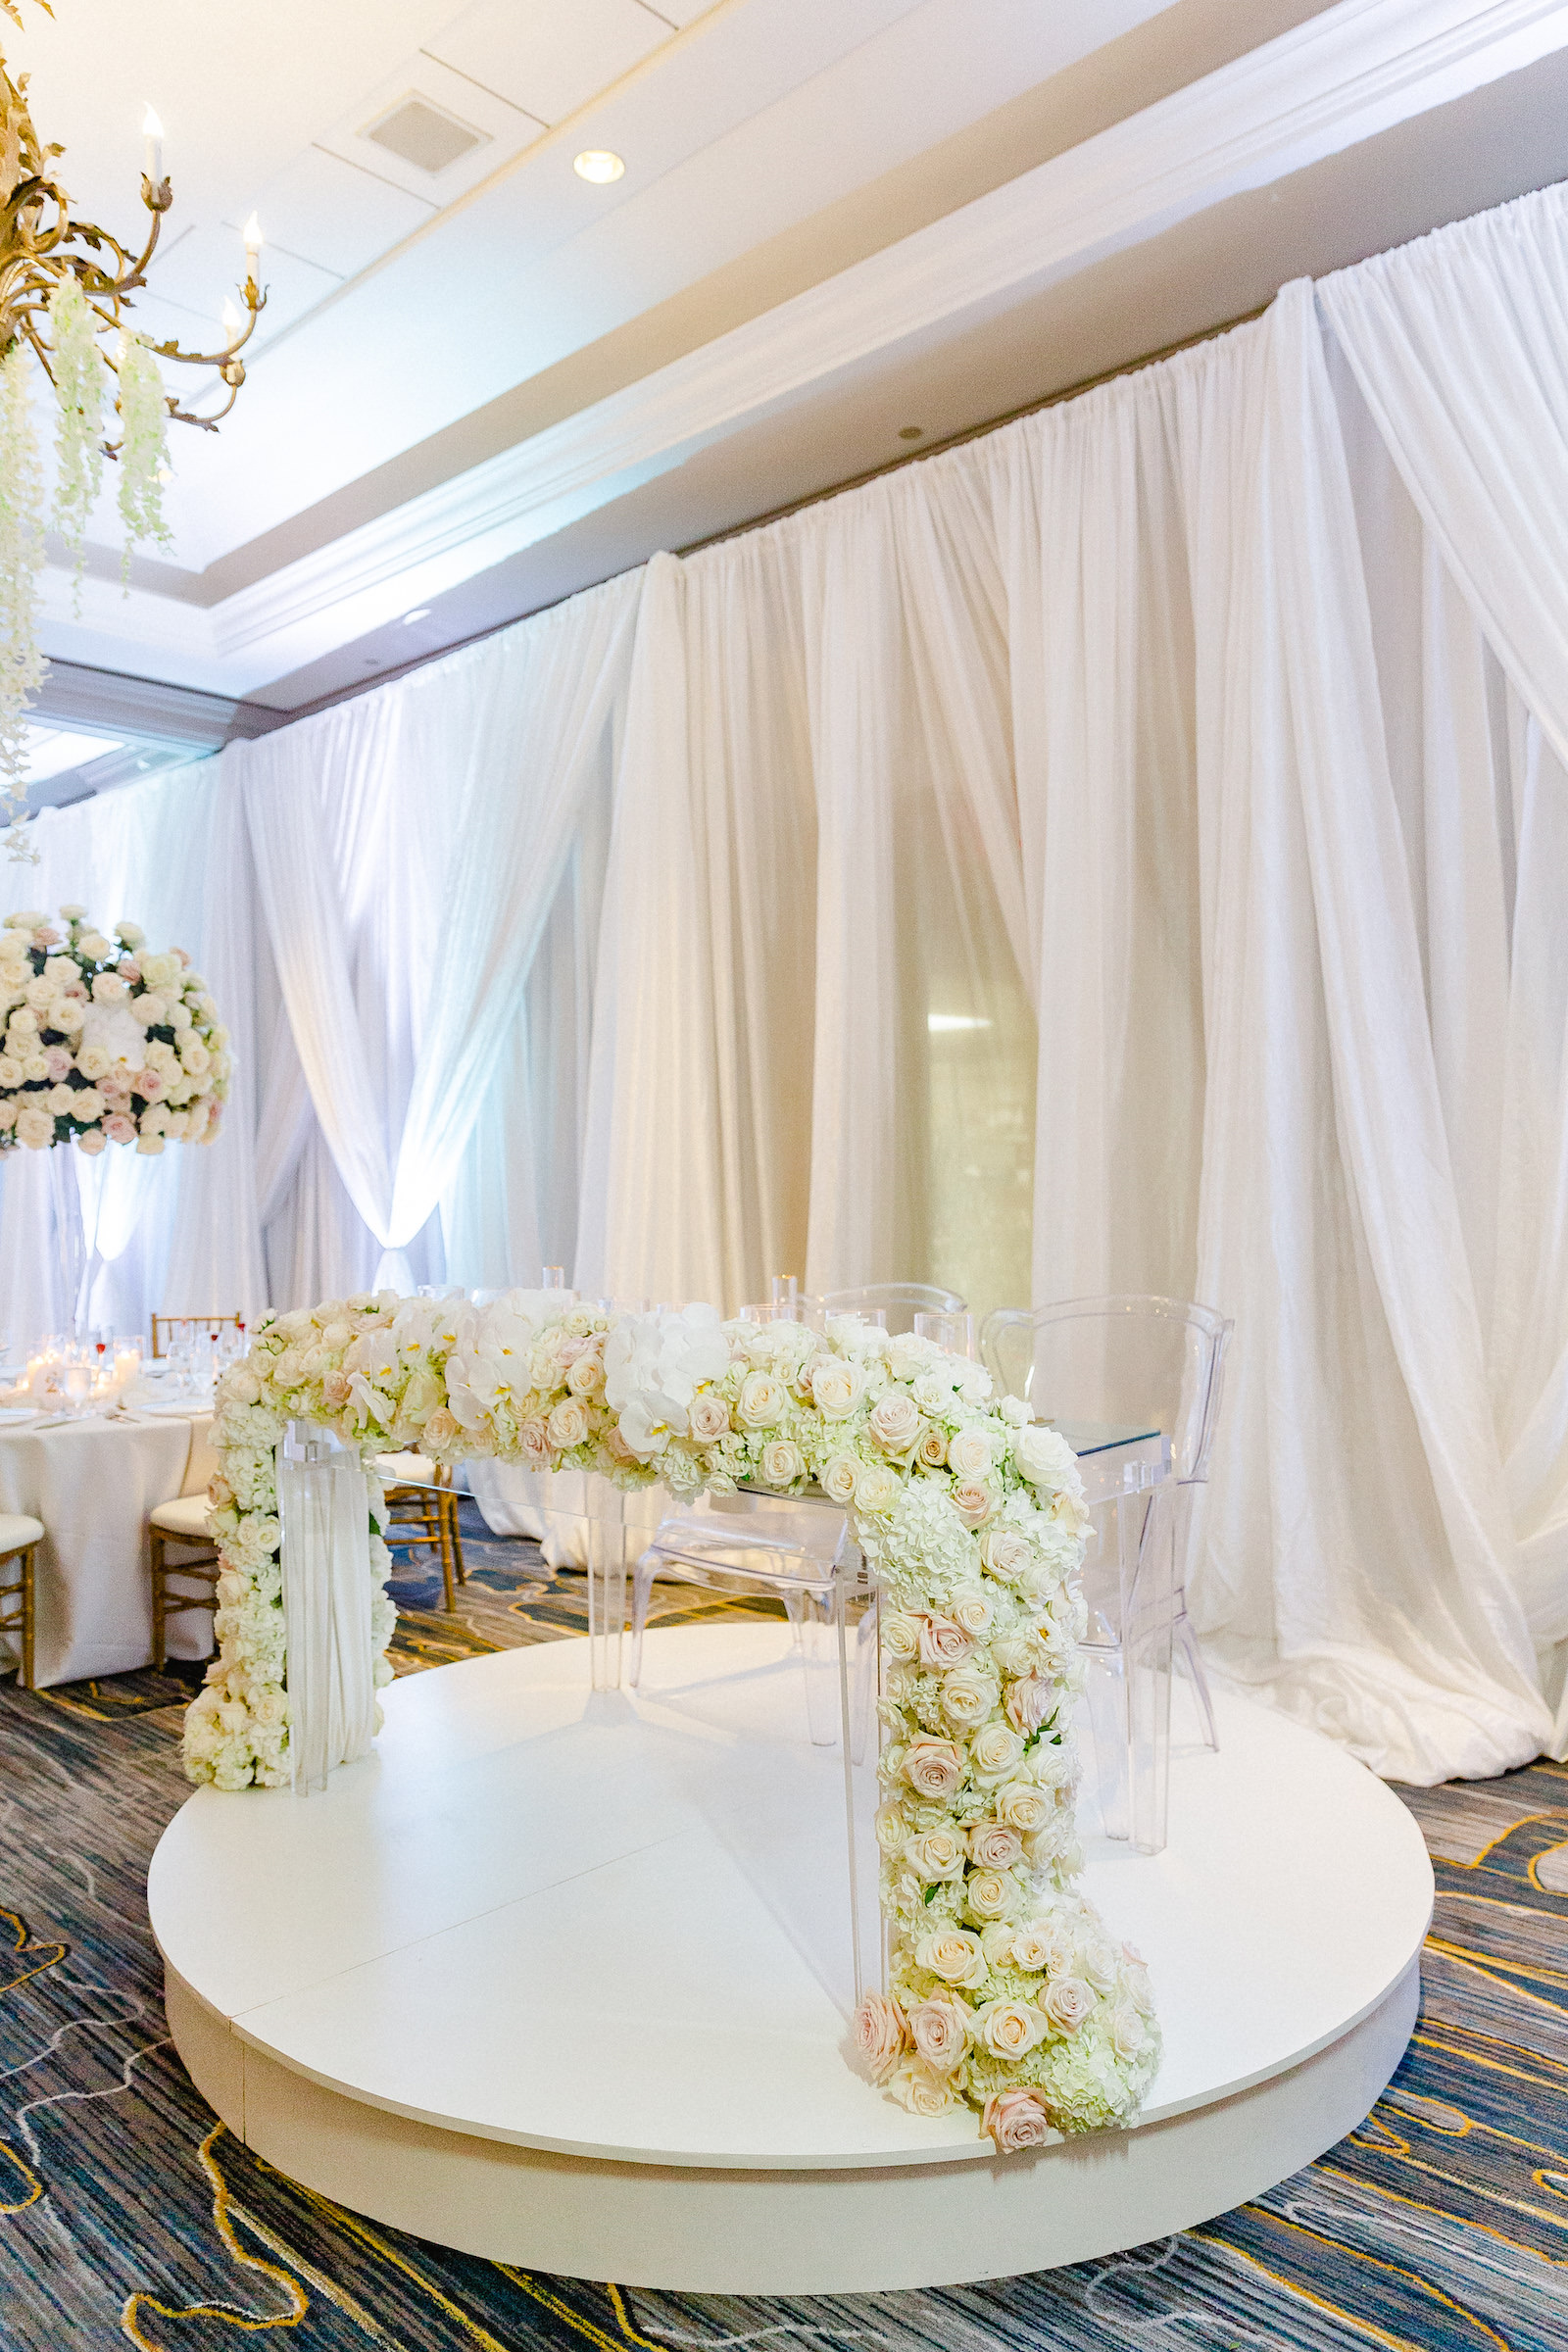 Romantic and Elegant All White Wedding Reception Decor, Acrylic Sweetheart Table and Chairs with Lush White and Blush Pink Roses, Hydrangeas Floral Waterfall Arrangement | Tampa Bay Wedding Florist Botanica International Design Studio